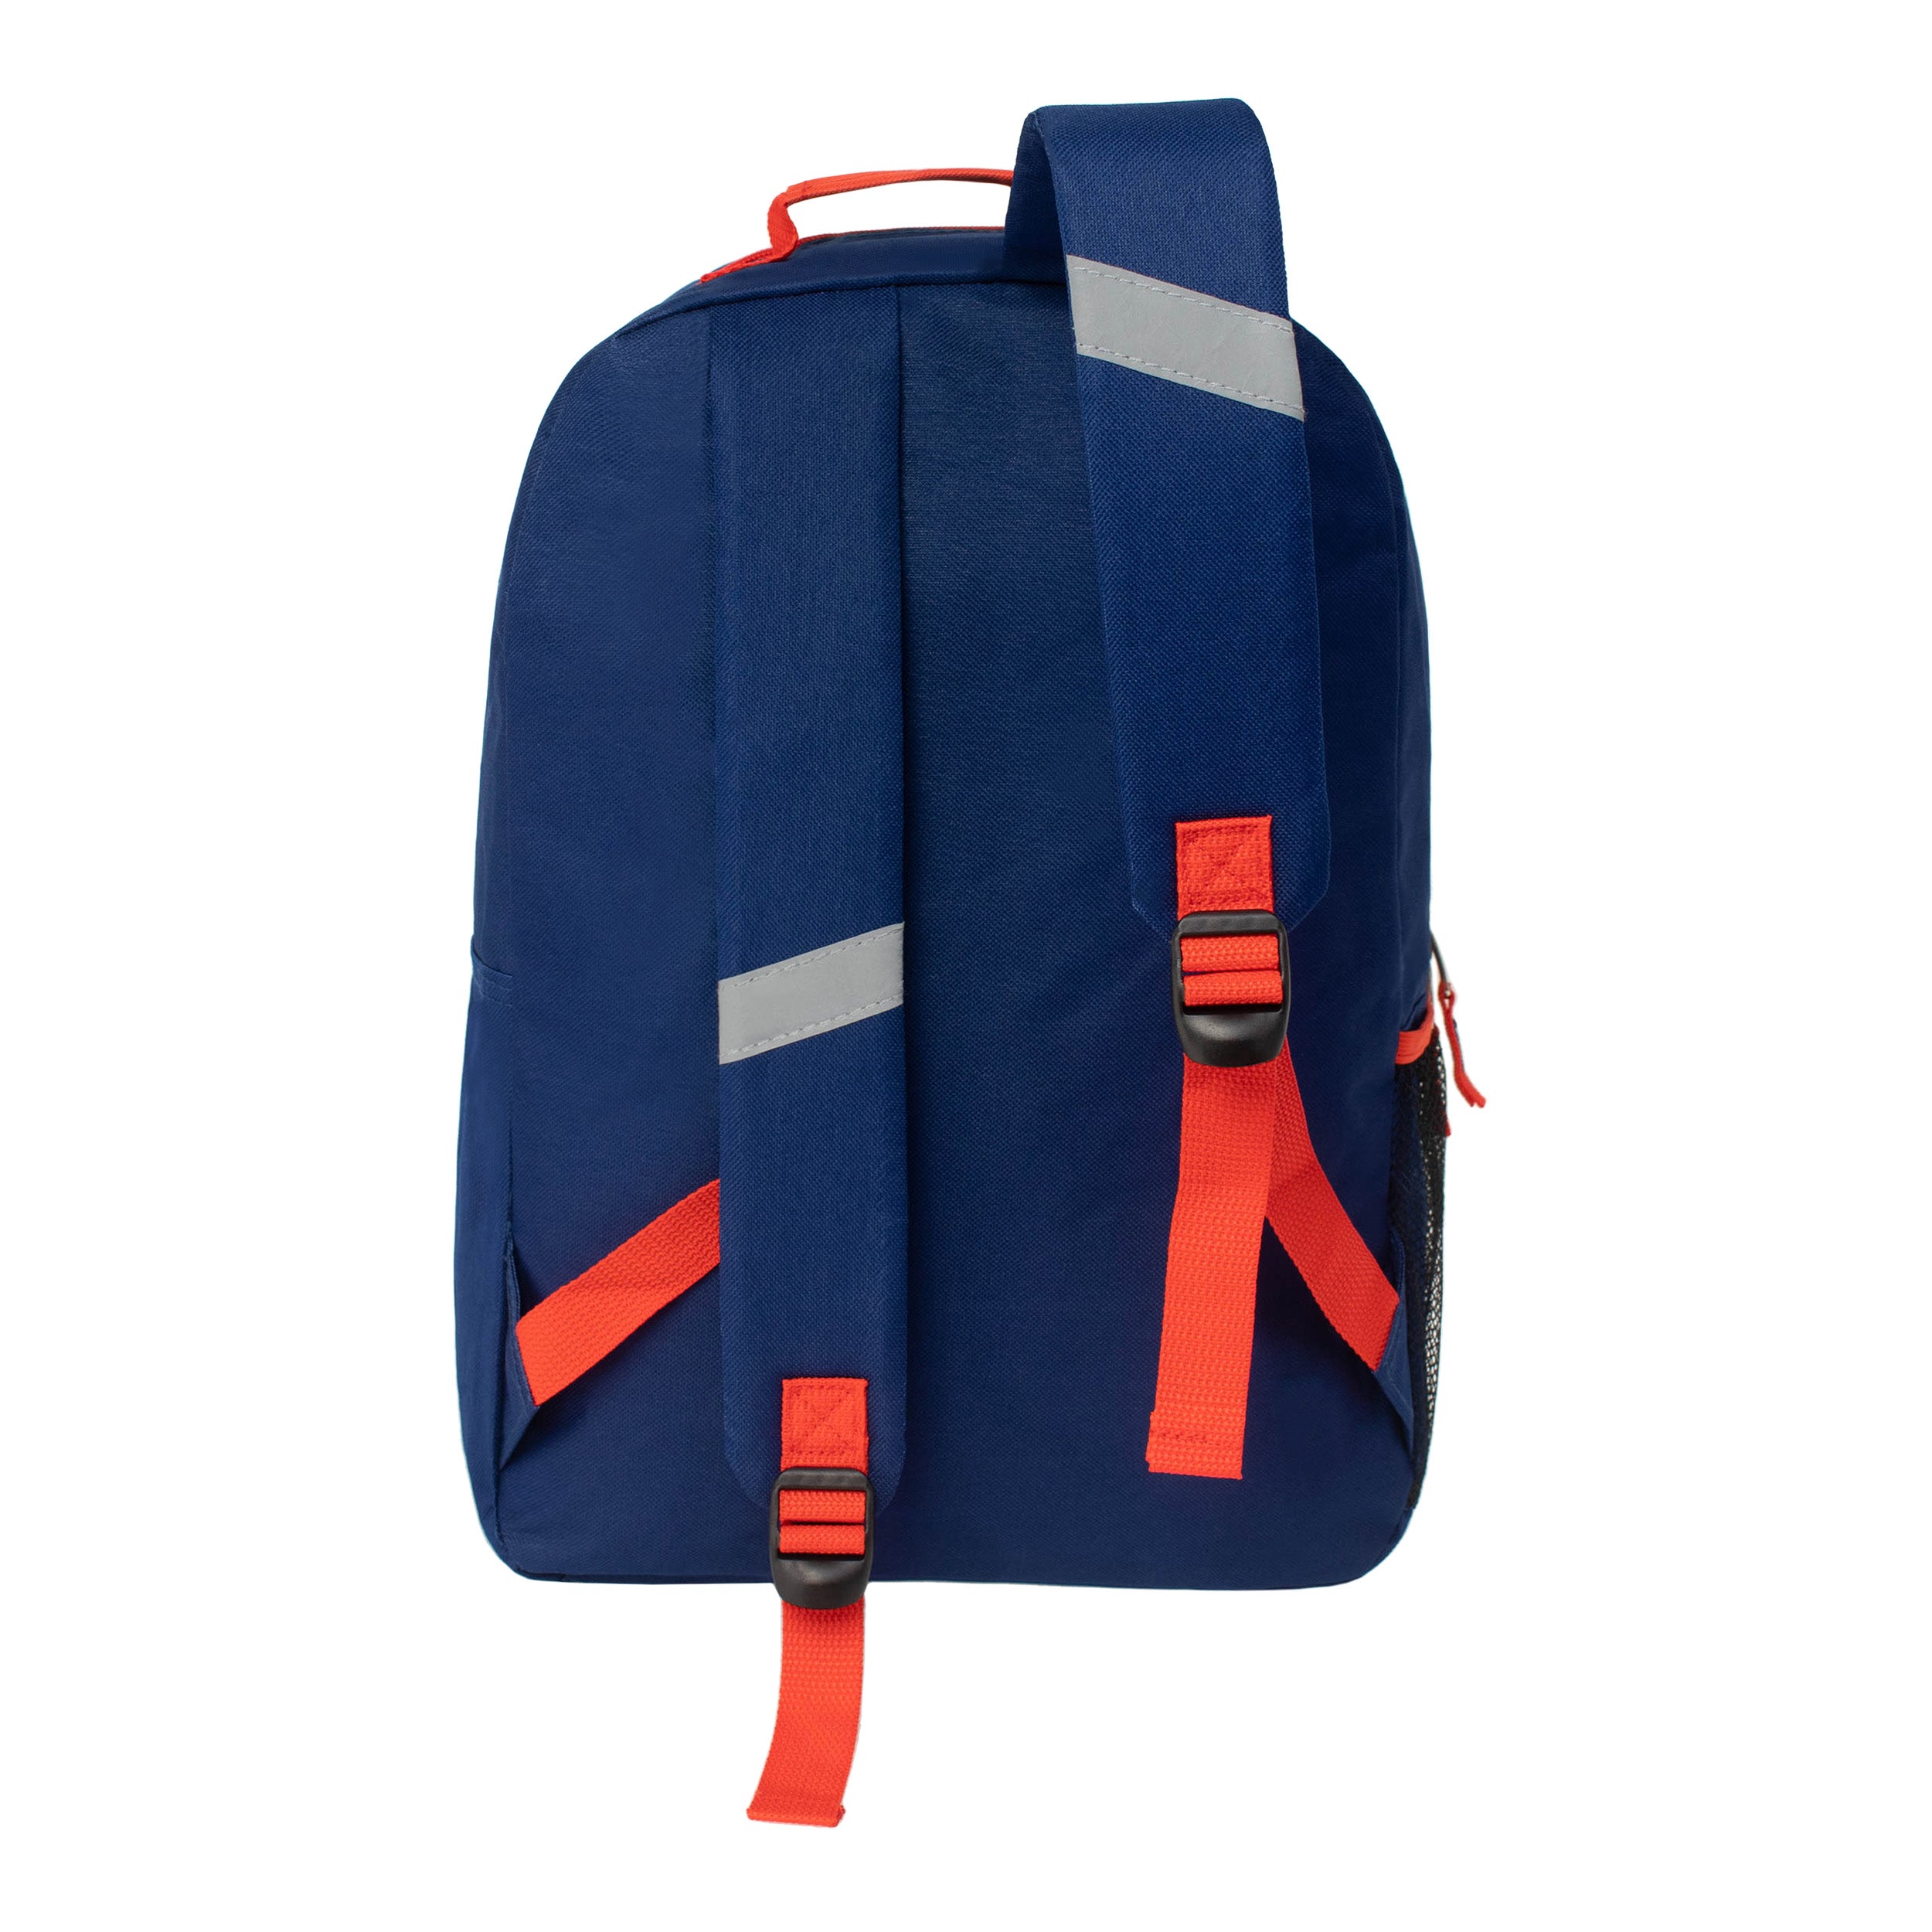 17 inch wholesale backpacks with 2 reflective stripes